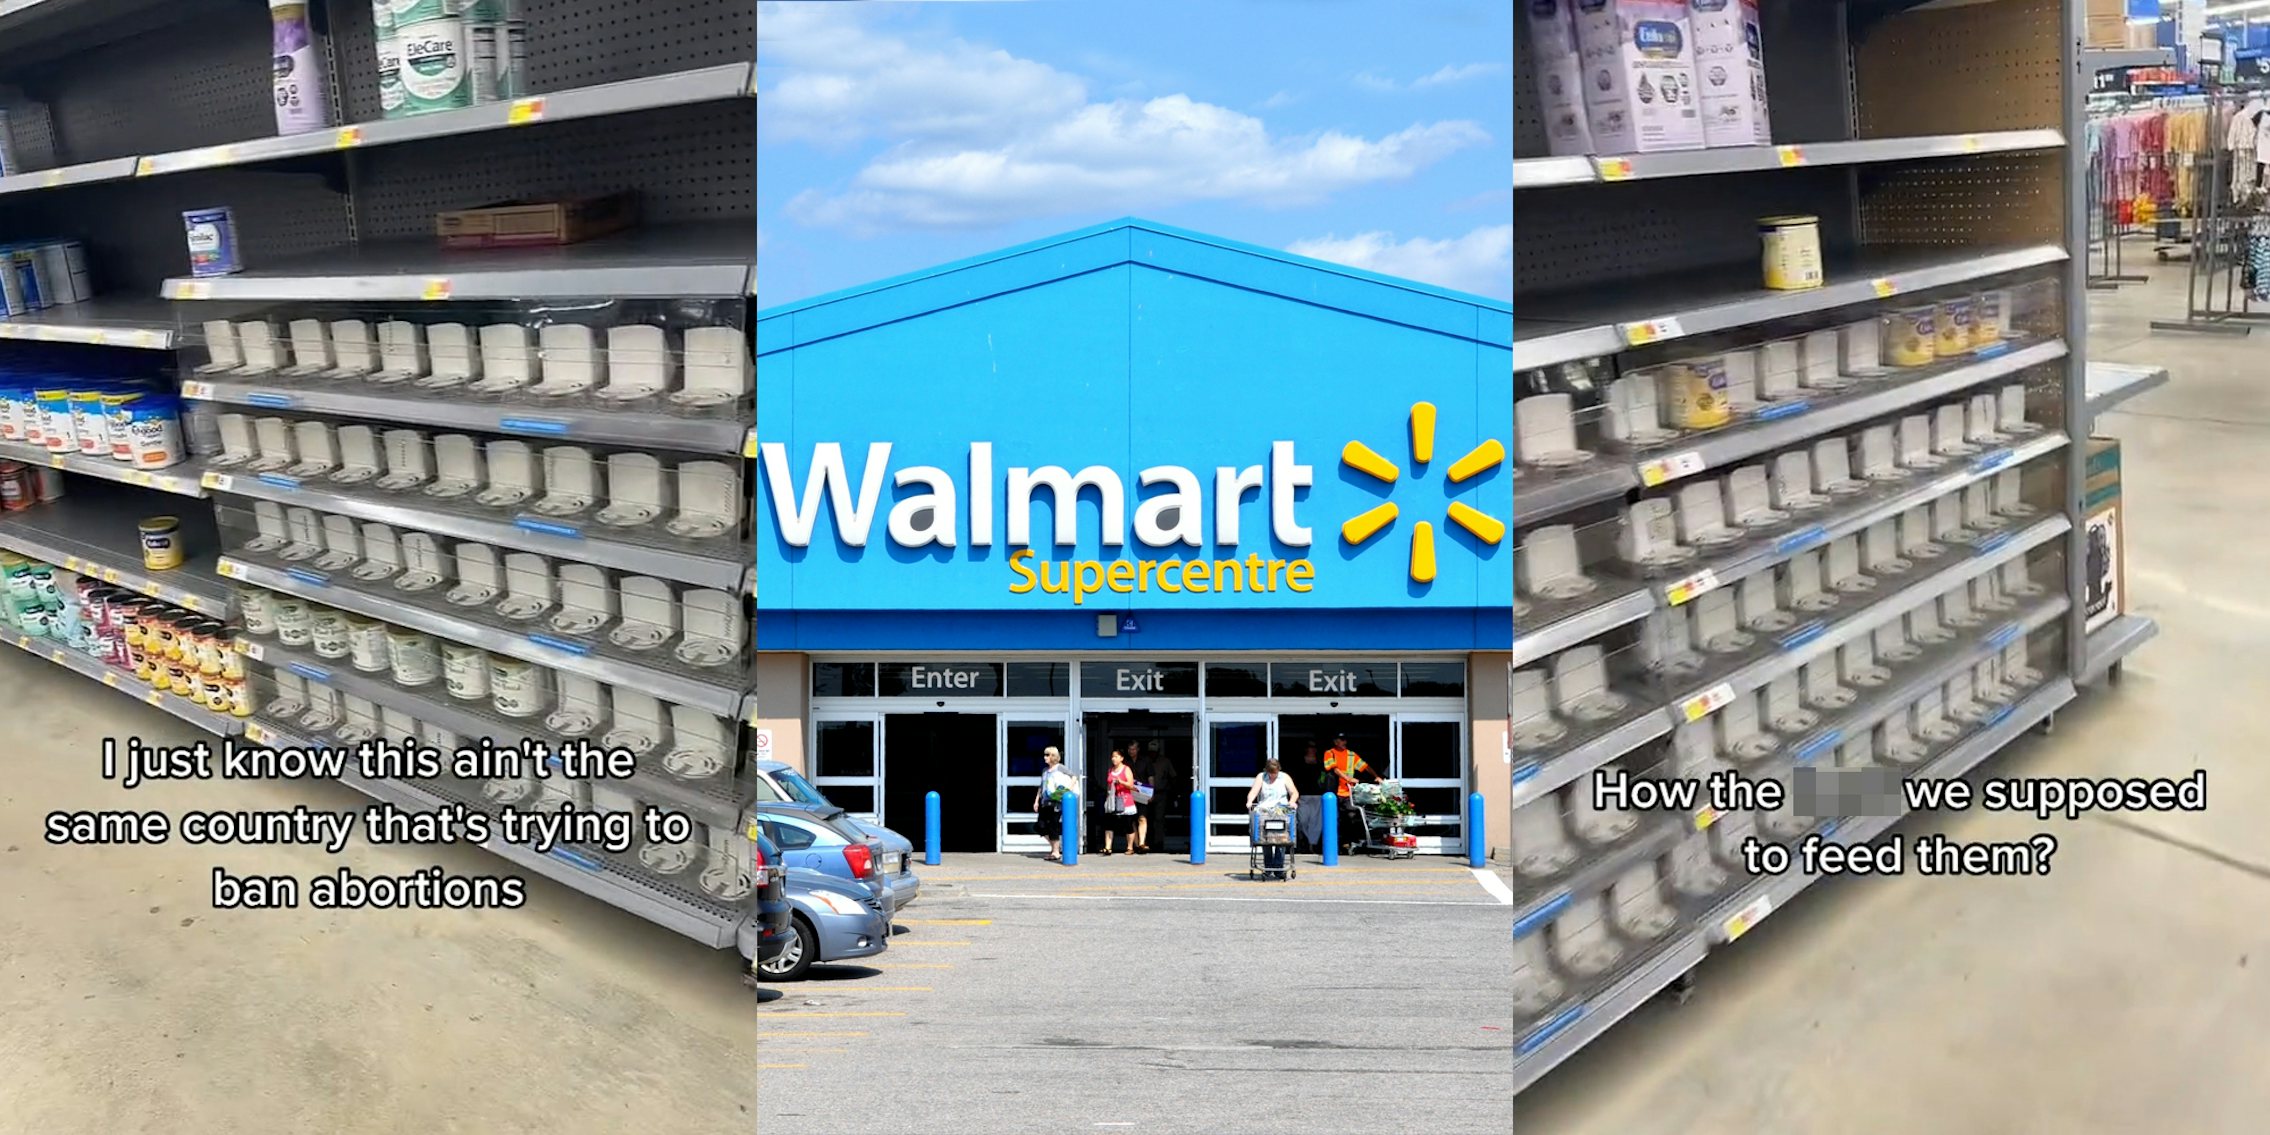 baby formula aisle at Walmart with caption 'I just know this ain't the same country that's trying to ban abortions' (l) Walmart sign on Walmart building with blue sky (c) Walmart baby formula aisle with caption 'How the blank we supposed to feed them?' (r)